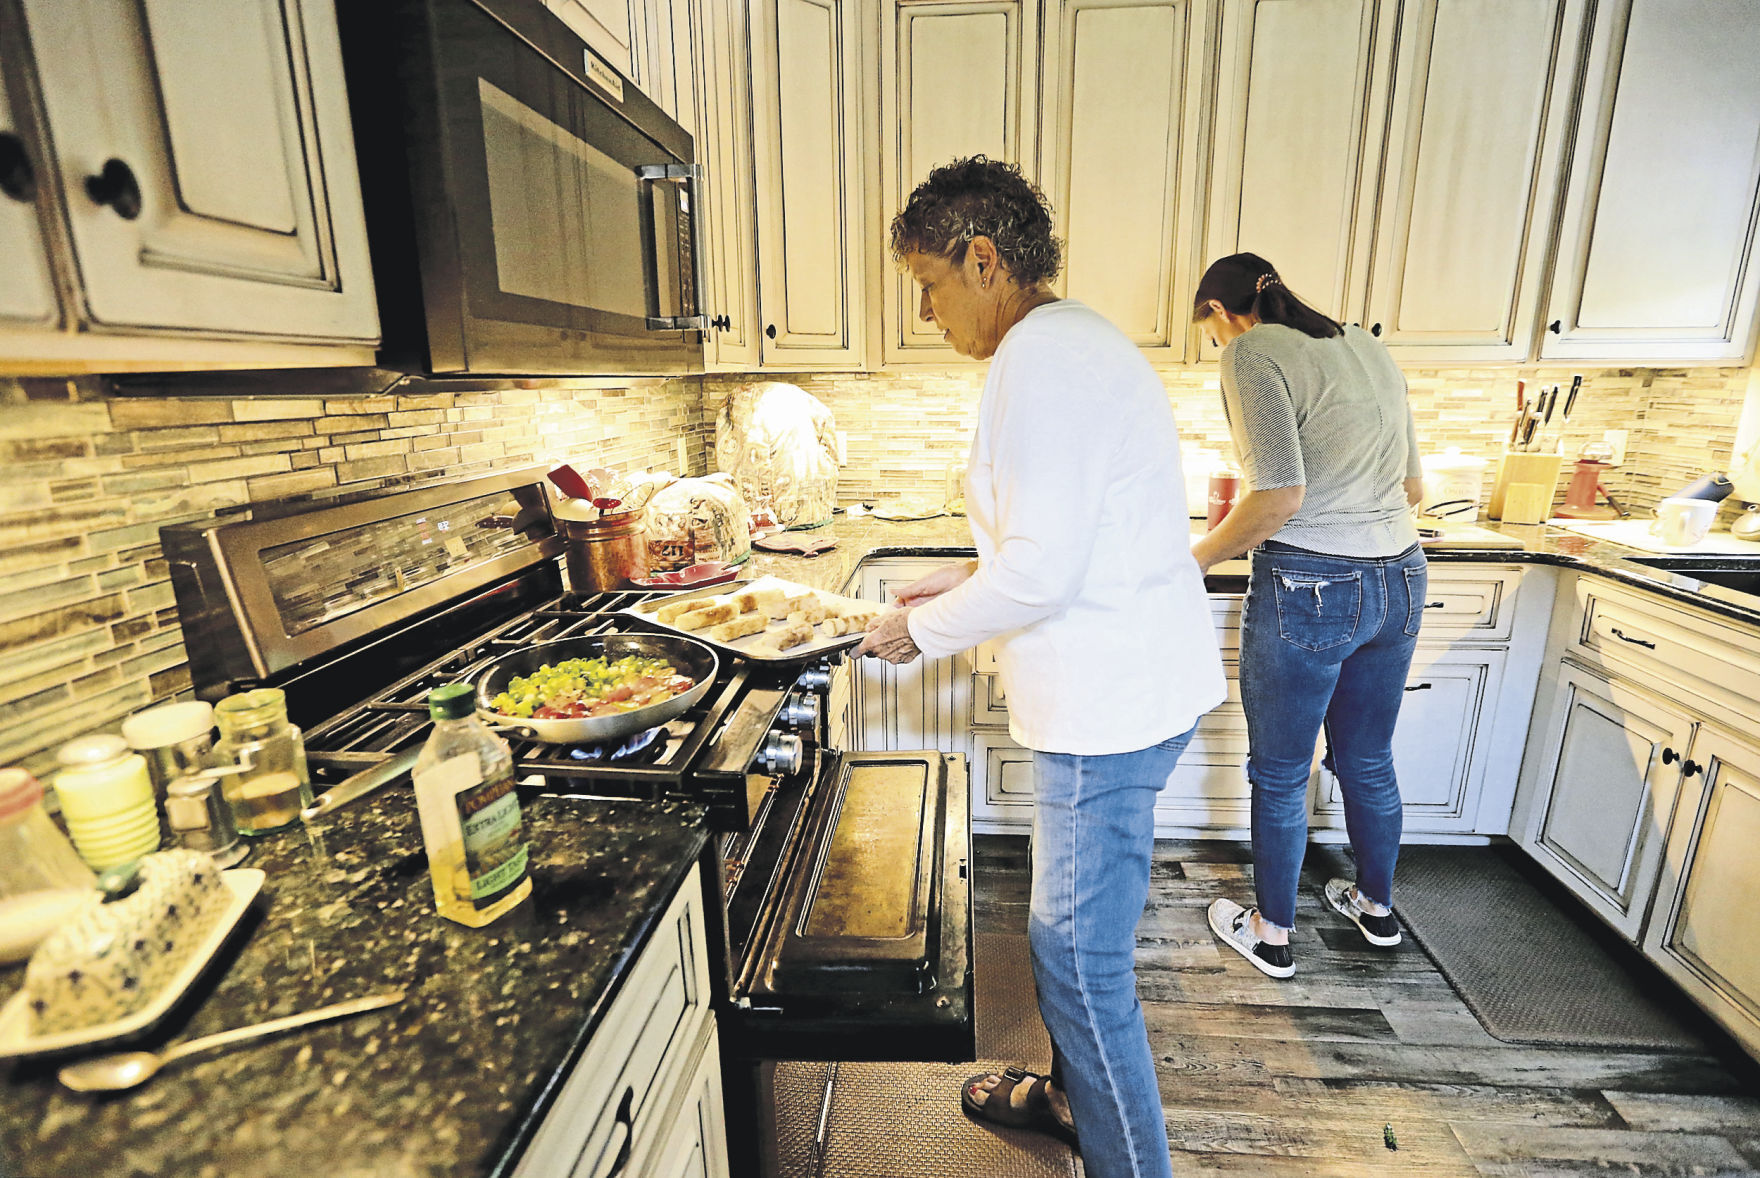 Owner Carol Gebelt (left) and her daughter Katie Burcham prepare breakfast for guests at The Steamboat House Bed and Breakfast in Galena, Ill.    PHOTO CREDIT: JESSICA REILLY